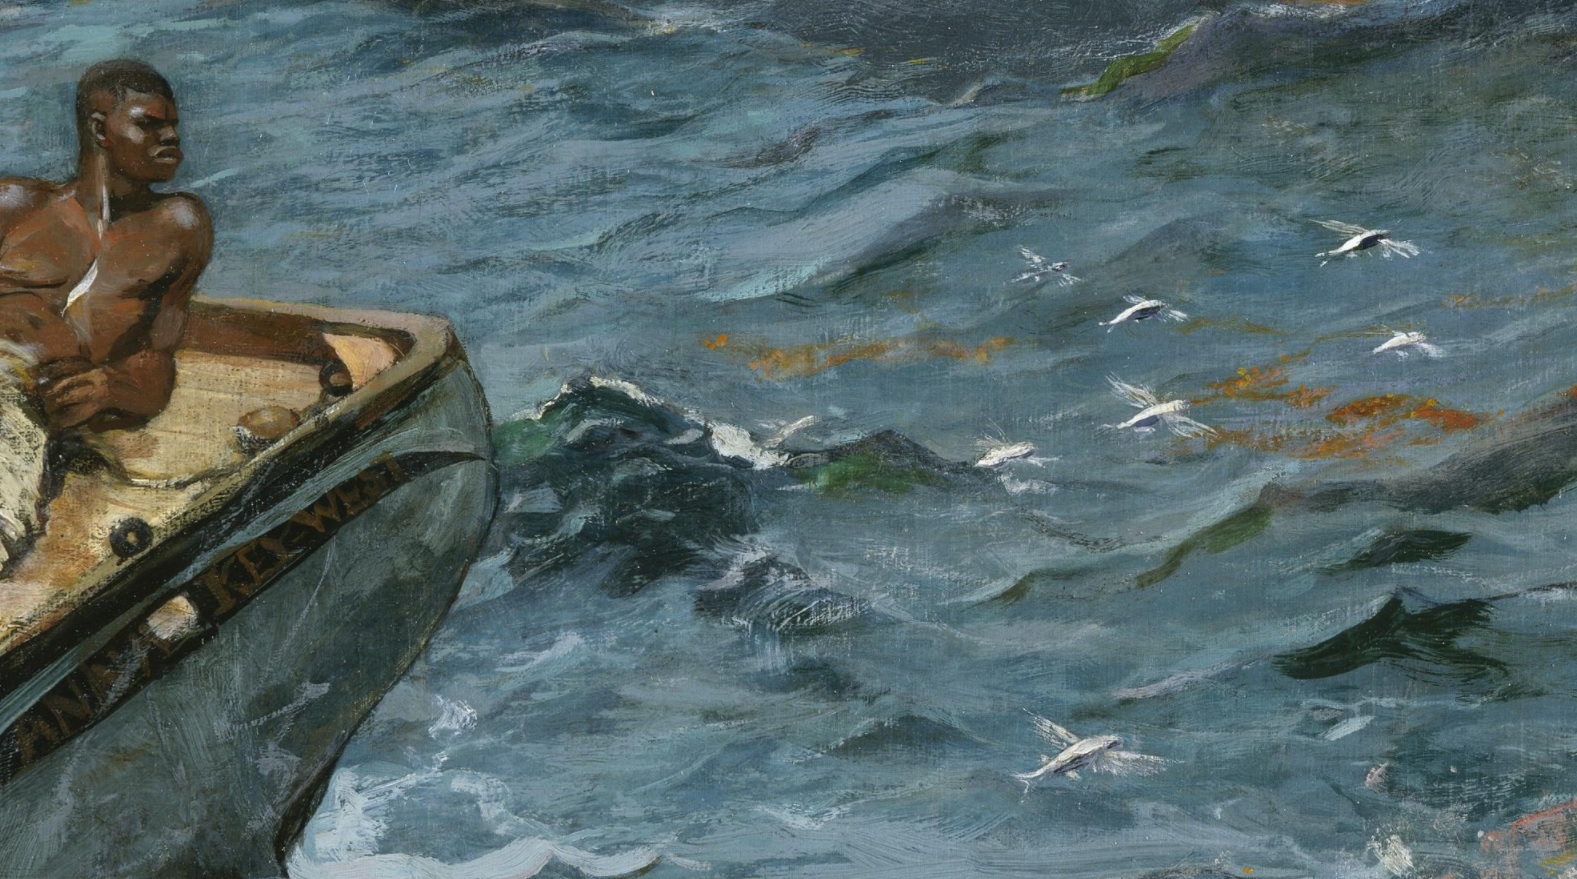 _Winslow_Homer_1899_The_Gulf_Stream_zoom_in_on_flying_fish_detail_.jpg